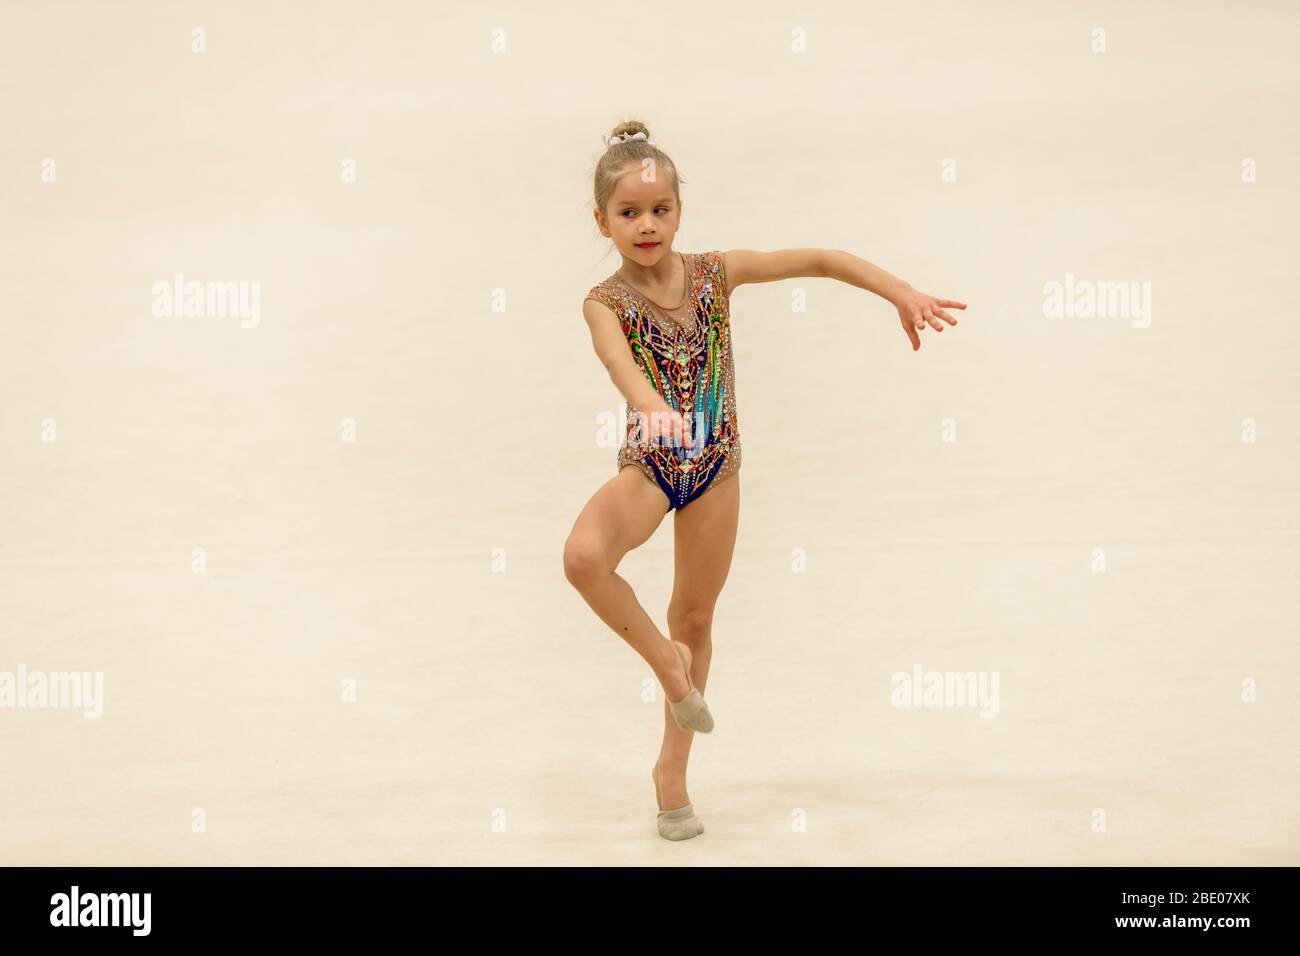 Portrait of a young gymnast. Portrait of a 7 years old girl in rhythmic  gymnastics competitions Stock Photo - Alamy